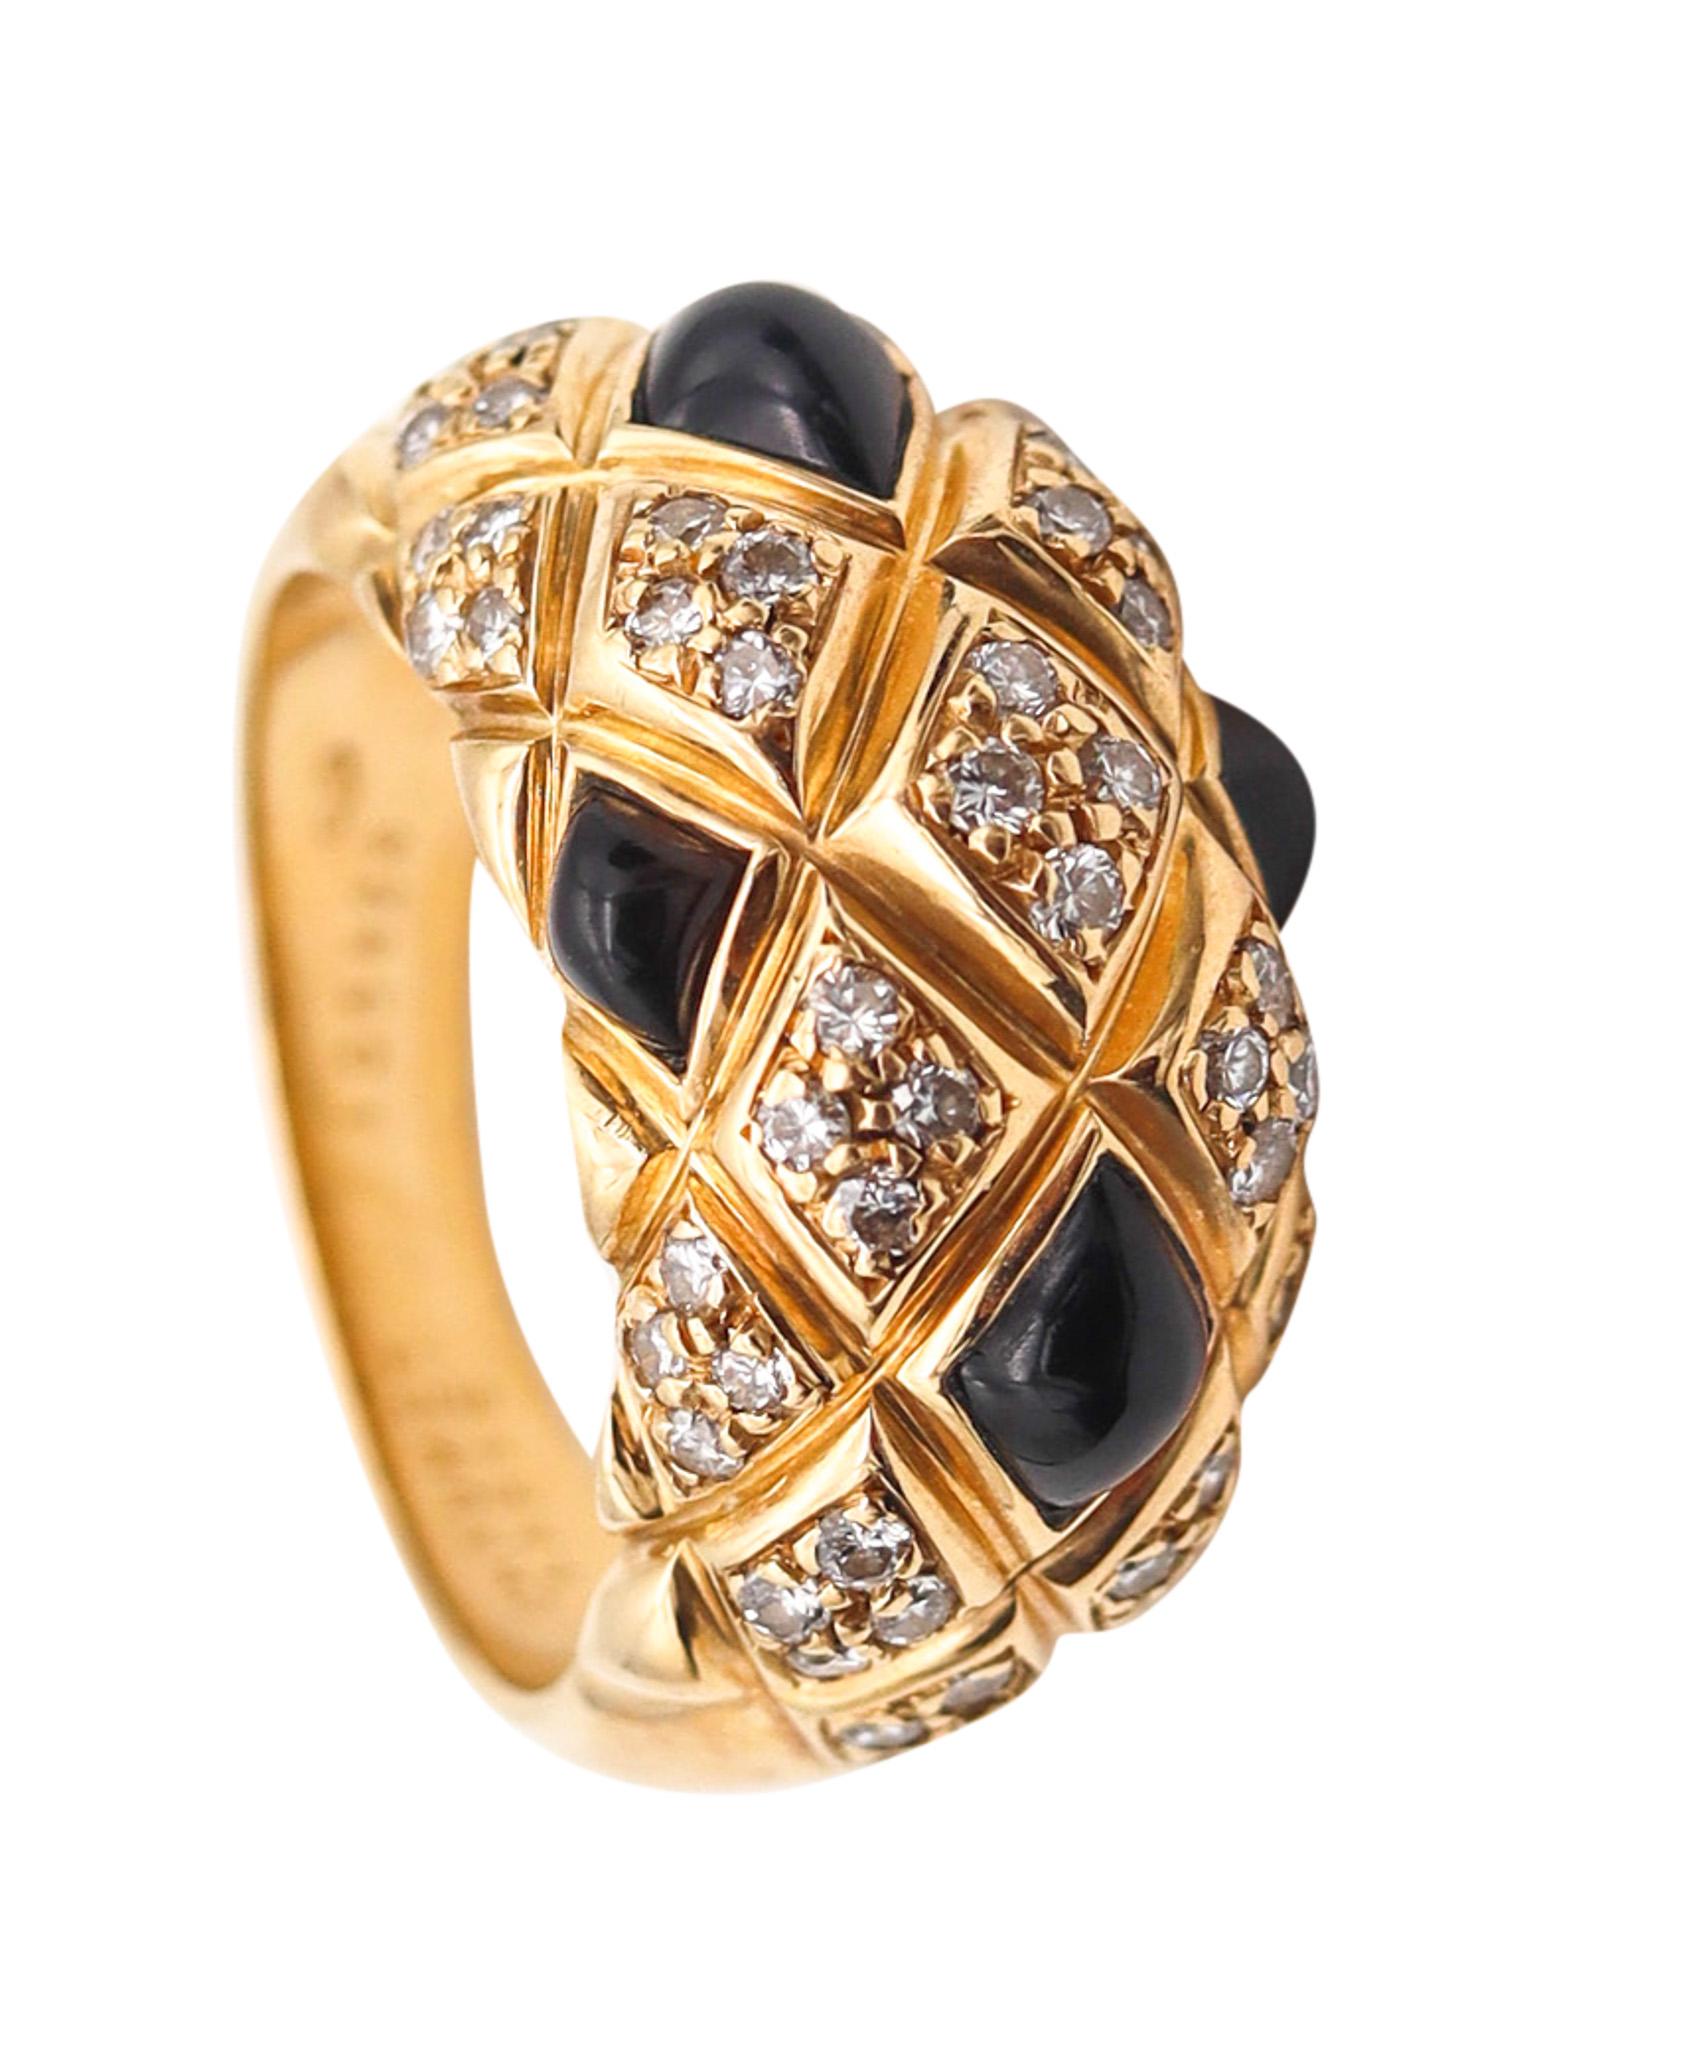 Chaumet Paris Quilted Cocktail Ring In 18Kt Gold With 1.72 Ctw Diamonds And Onyx For Sale